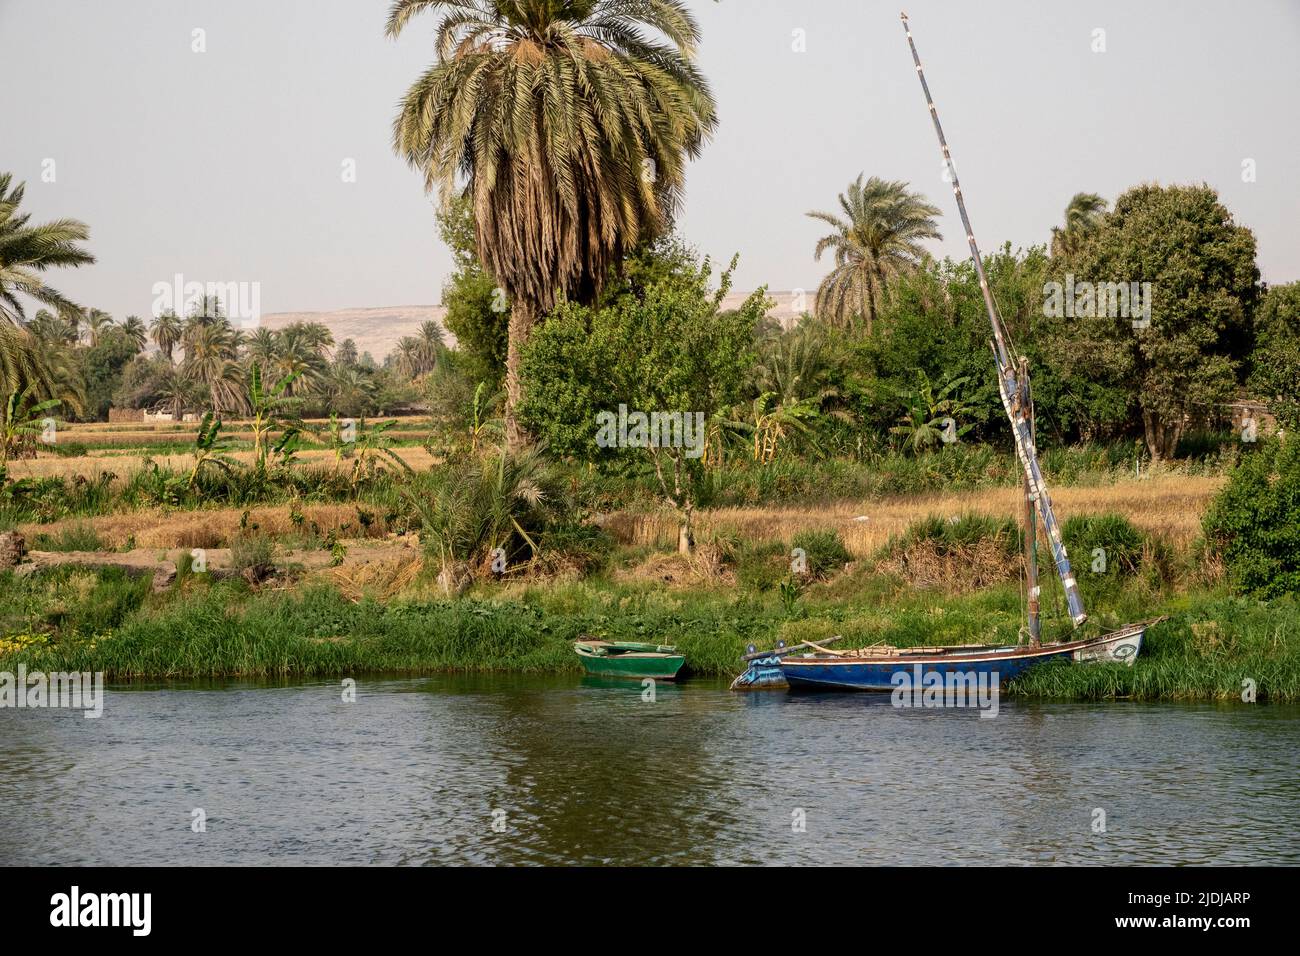 A traditional felucca moored in the reeds on the banks of the river Nile with vegetation and domestic scenes behind Stock Photo